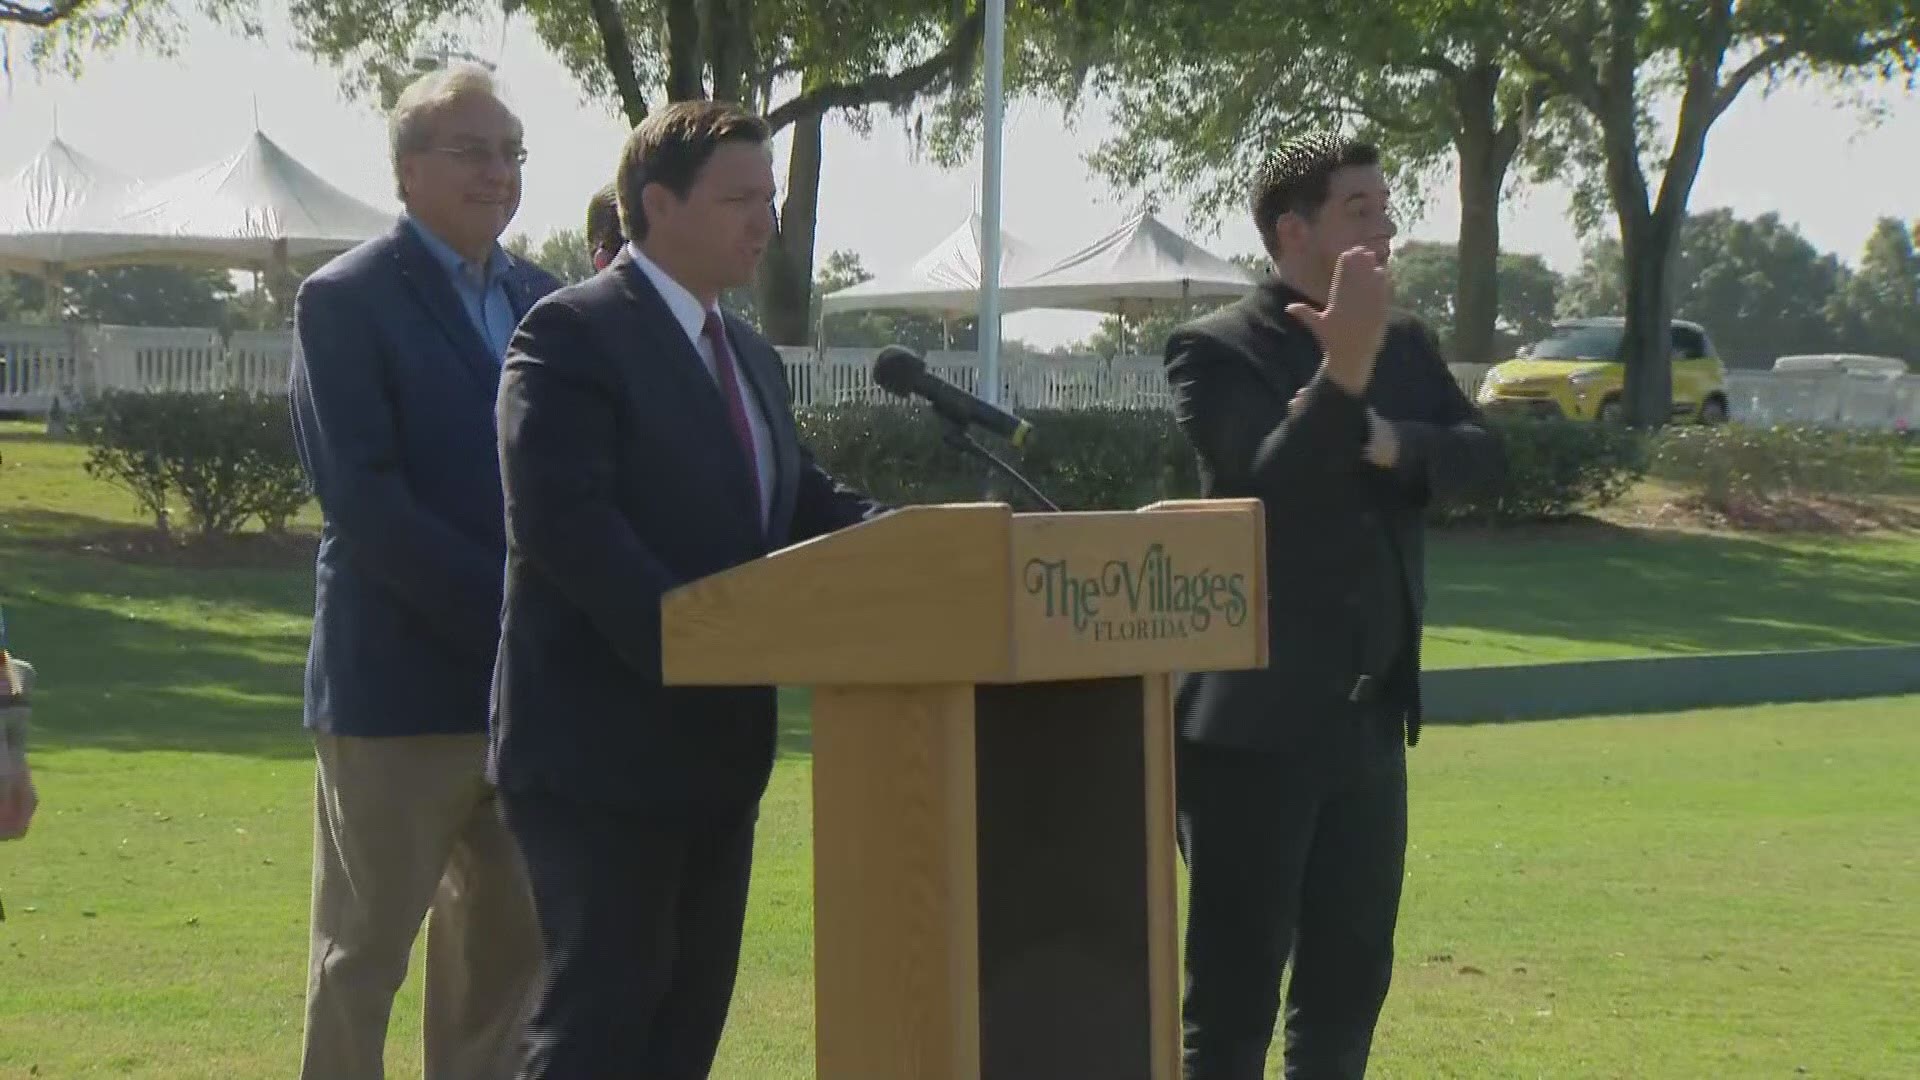 DeSantis says additional supplies will be shipped all over the state and there will be another testing site opening in The Villages.